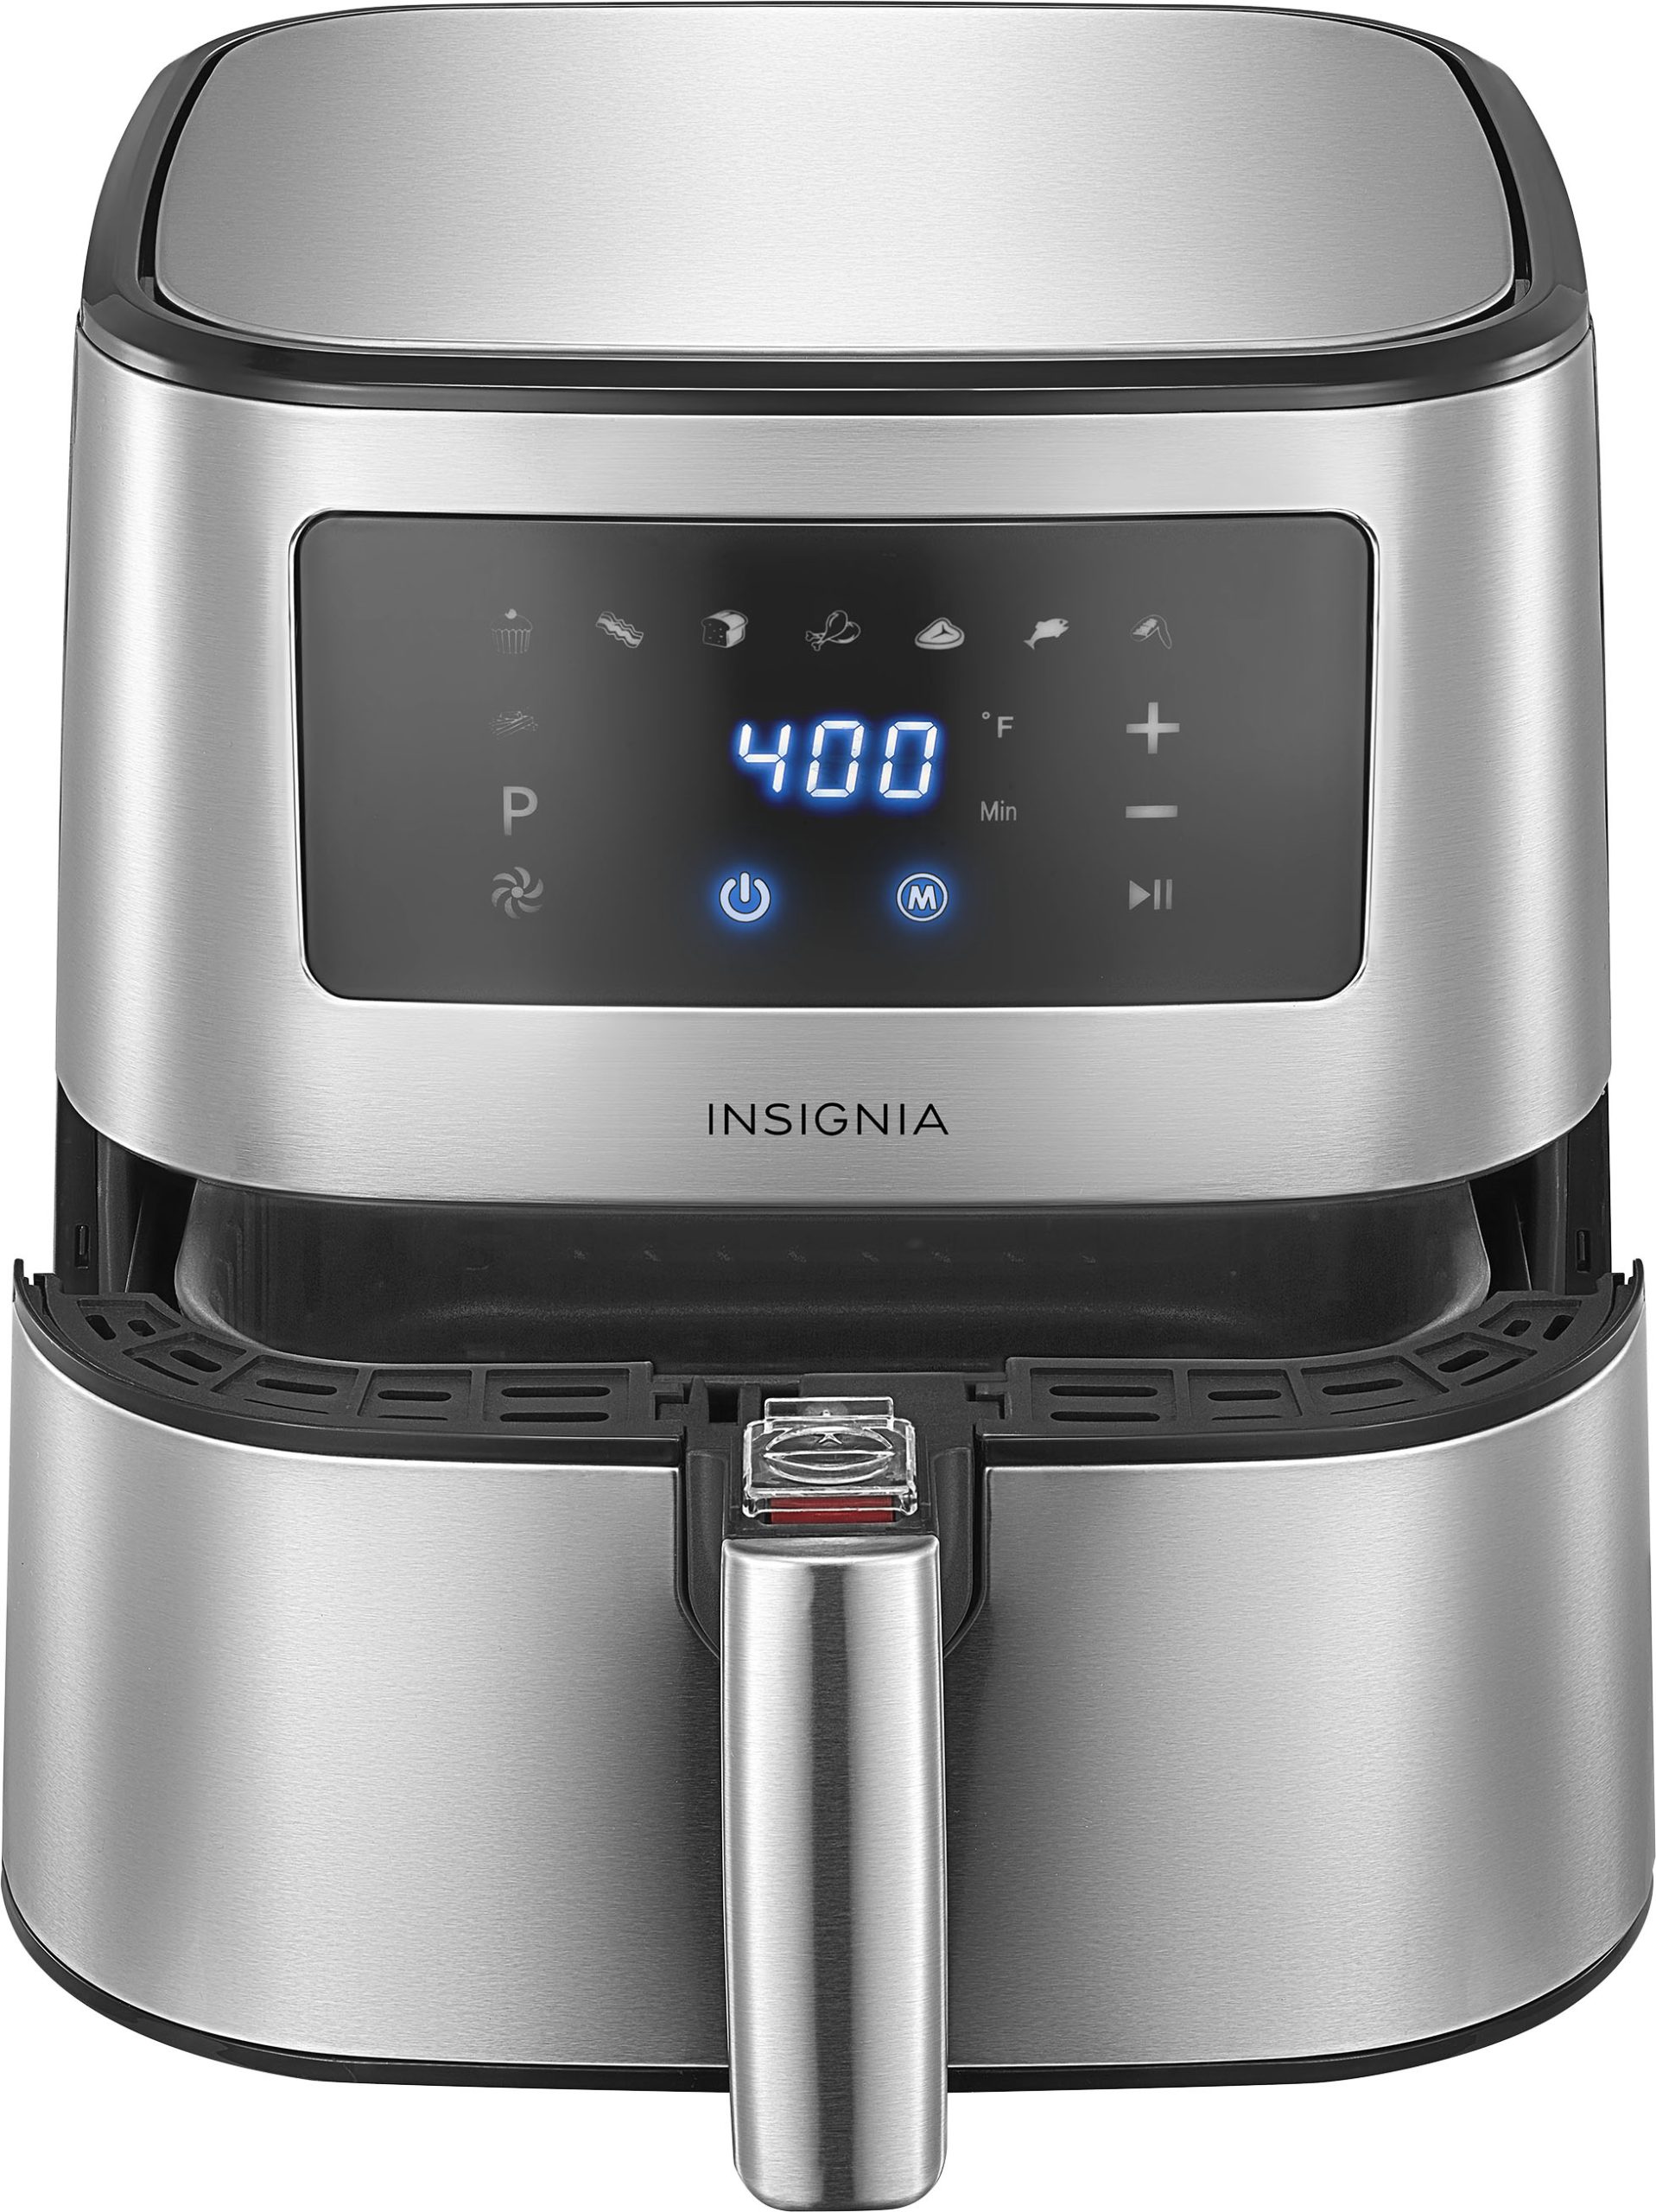 Insignia™ – 5 Qt. Digital Air Fryer – Stainless Steel – Just $39.99 at Best Buy